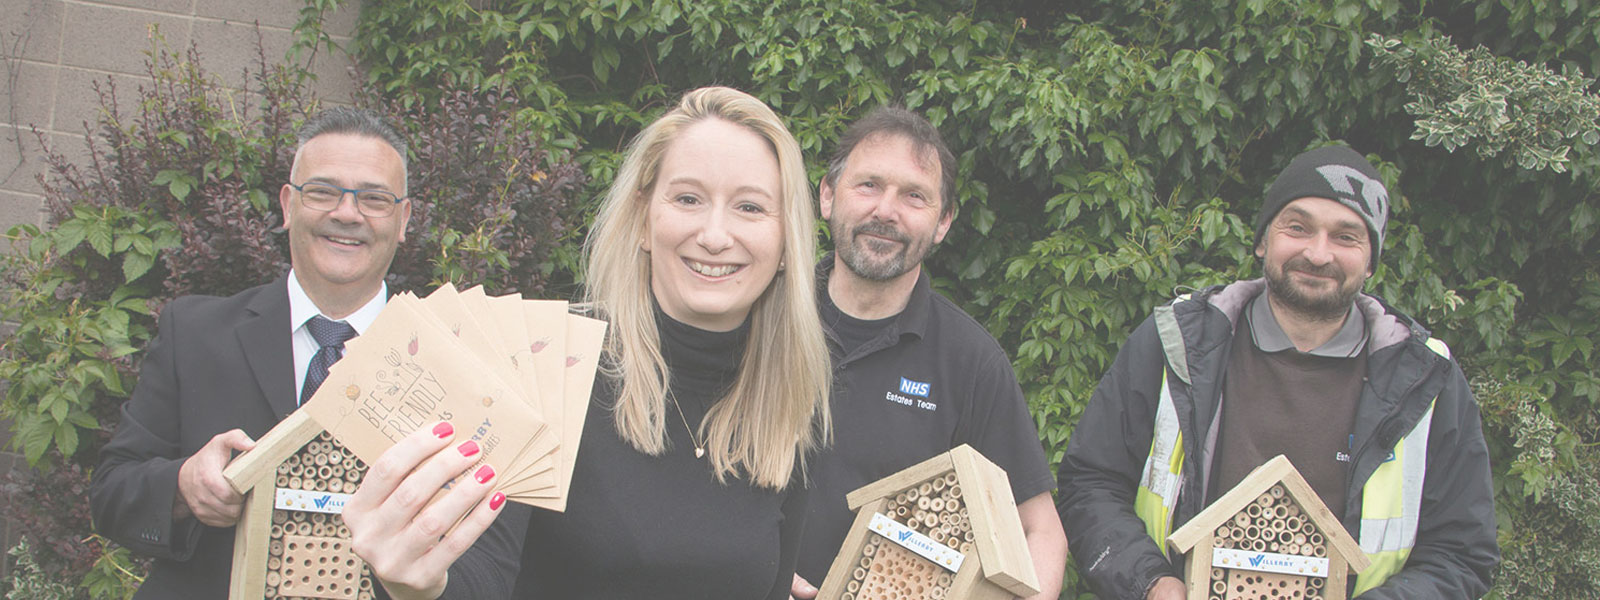 Willerby’s bee campaign - Hedley Wilson, Building Estates Officer HRI; Chloe Lawford from Willerby’s marketing department,  Mike Burn and Craig Crabb, both gardeners at HRI.